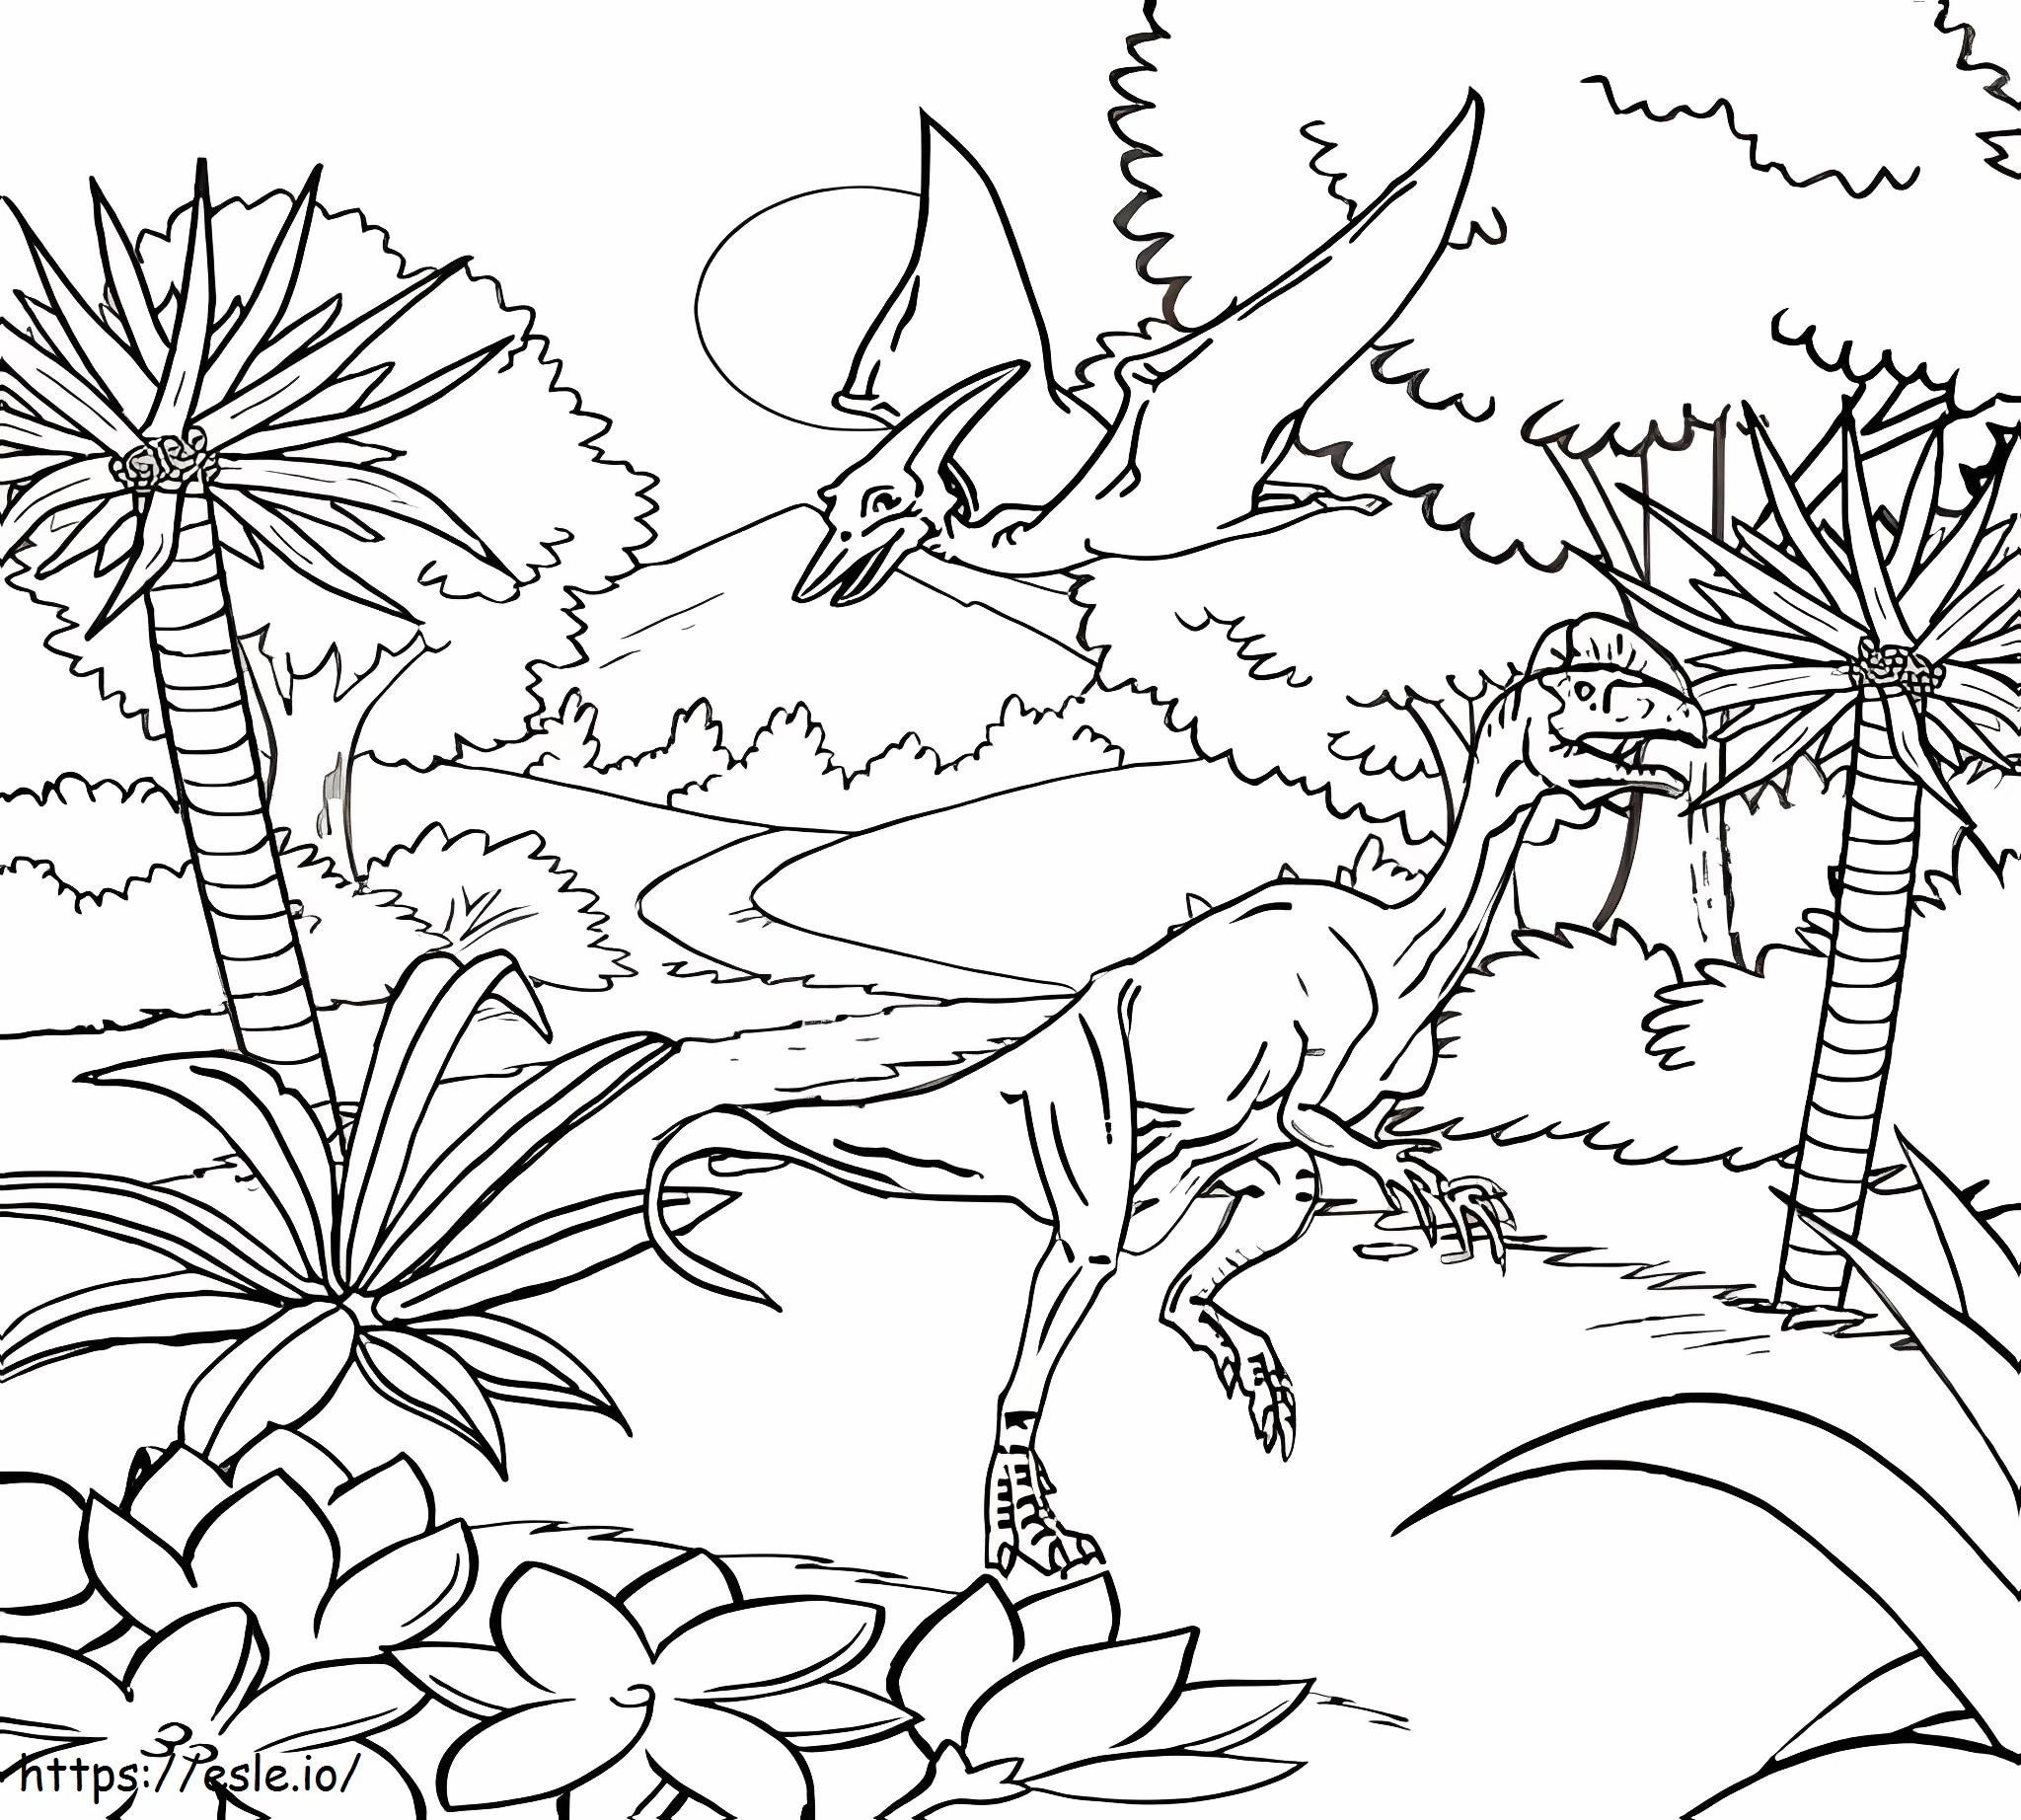 Stone Age Dinosaur coloring page